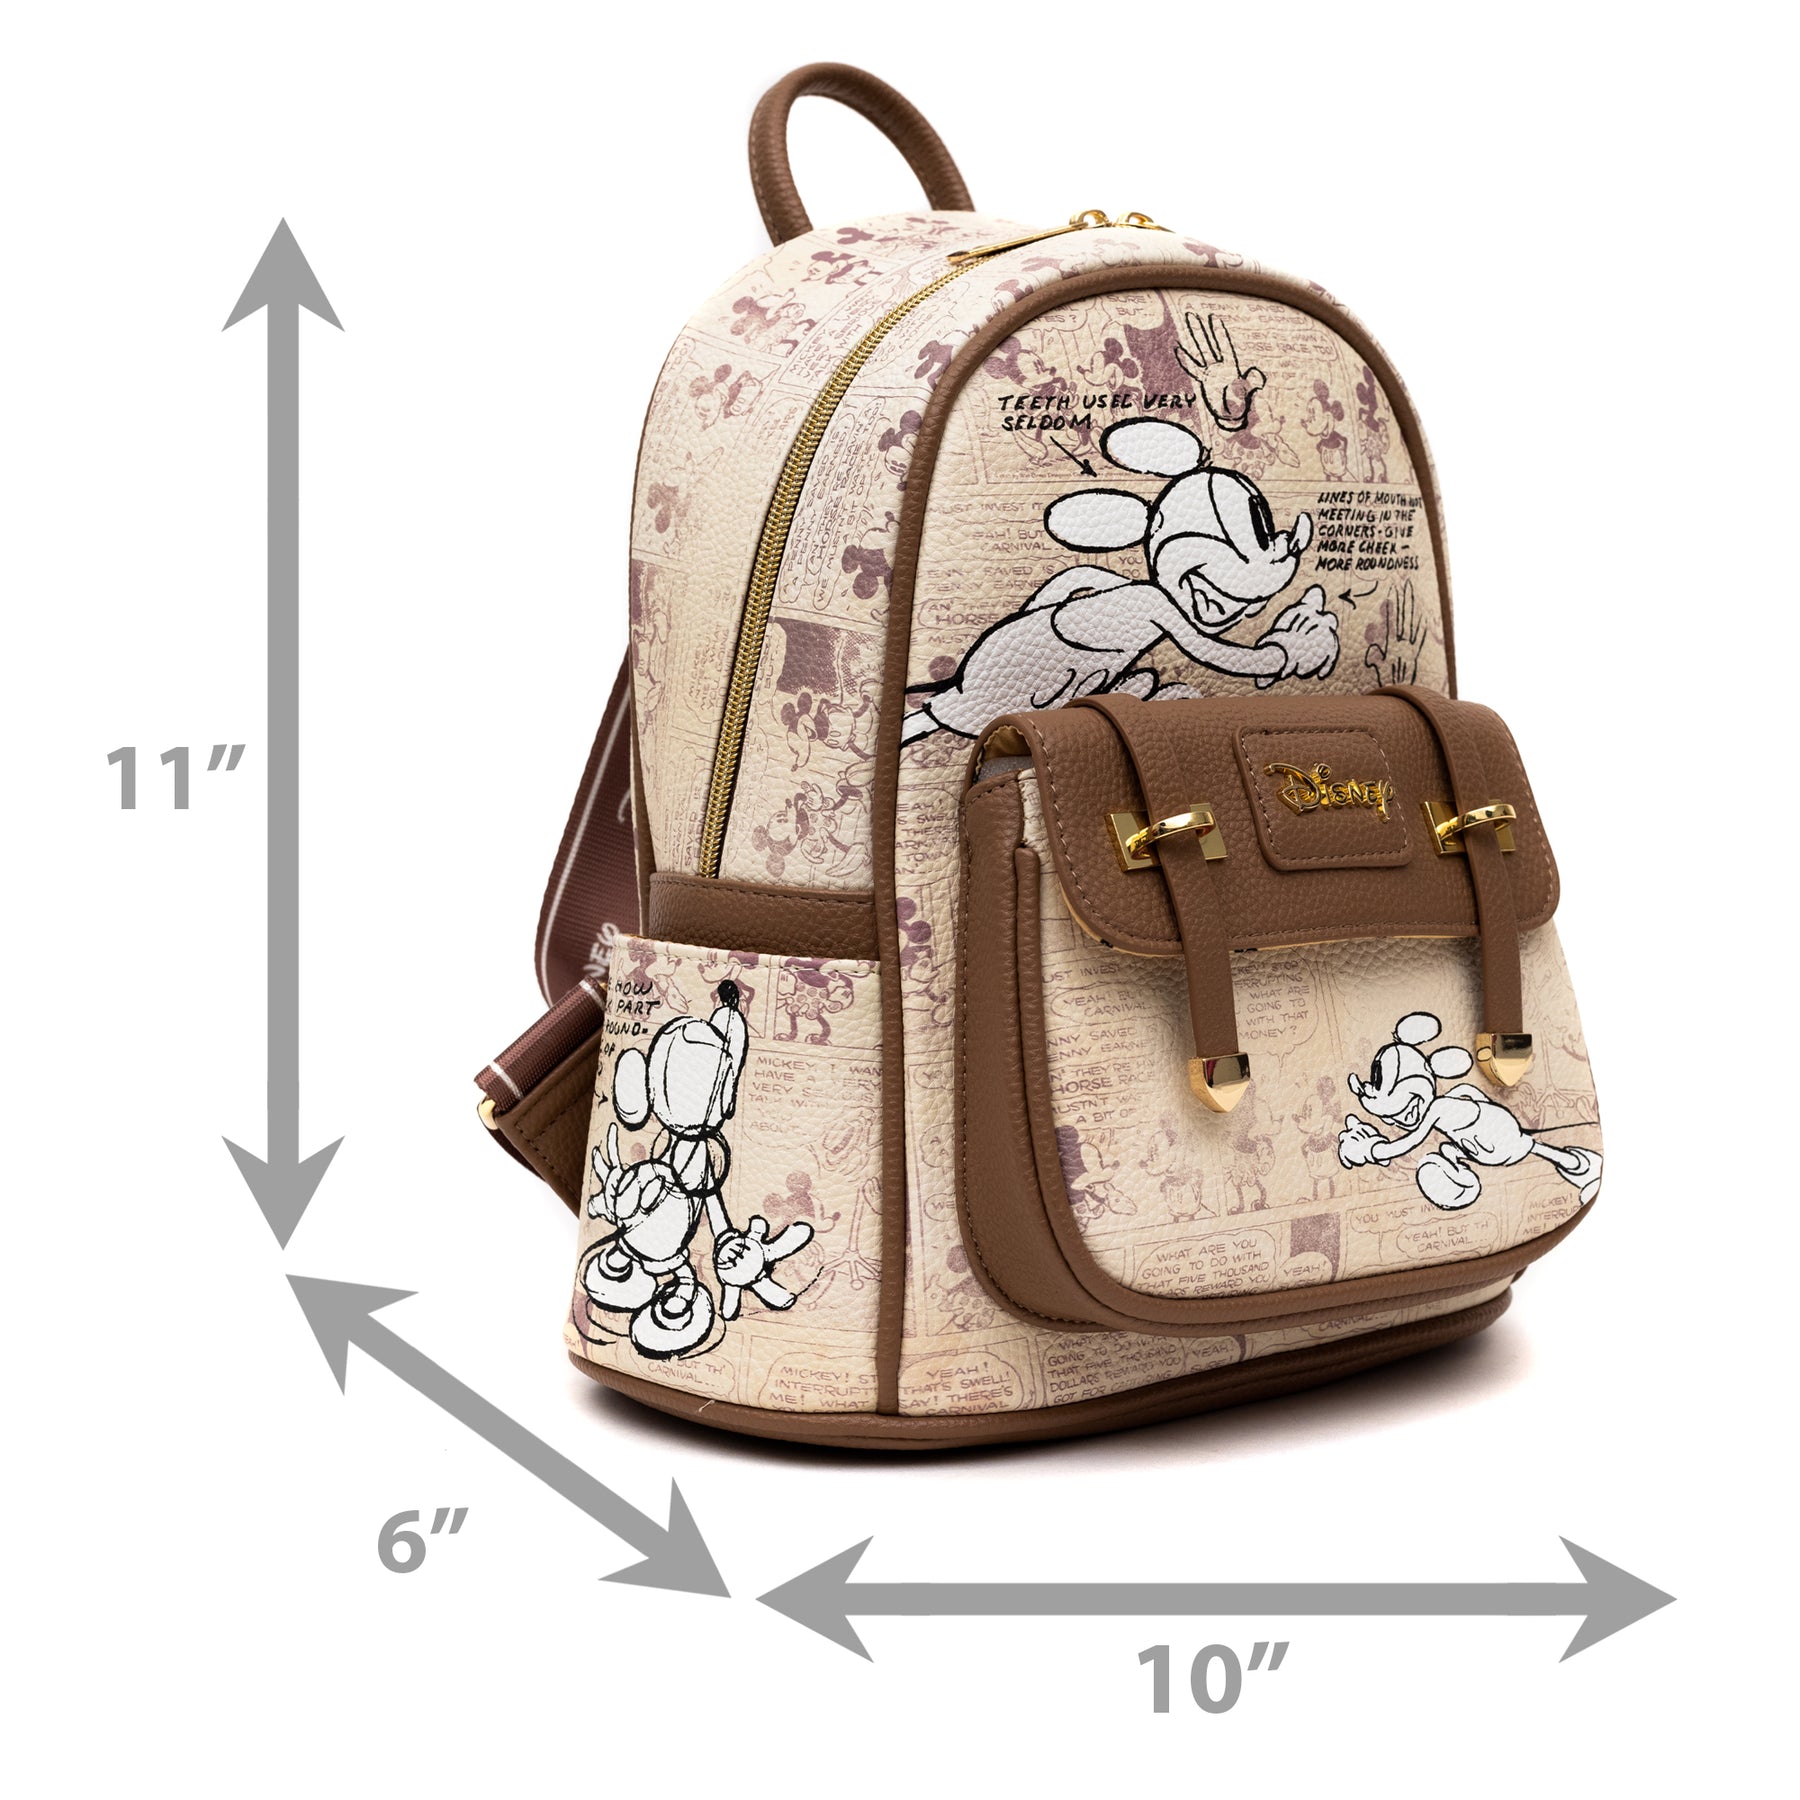 WondaPOP LUXE - Disney Frozen Mini Backpack - Limited Edition - NEW RELEASE  in 2023